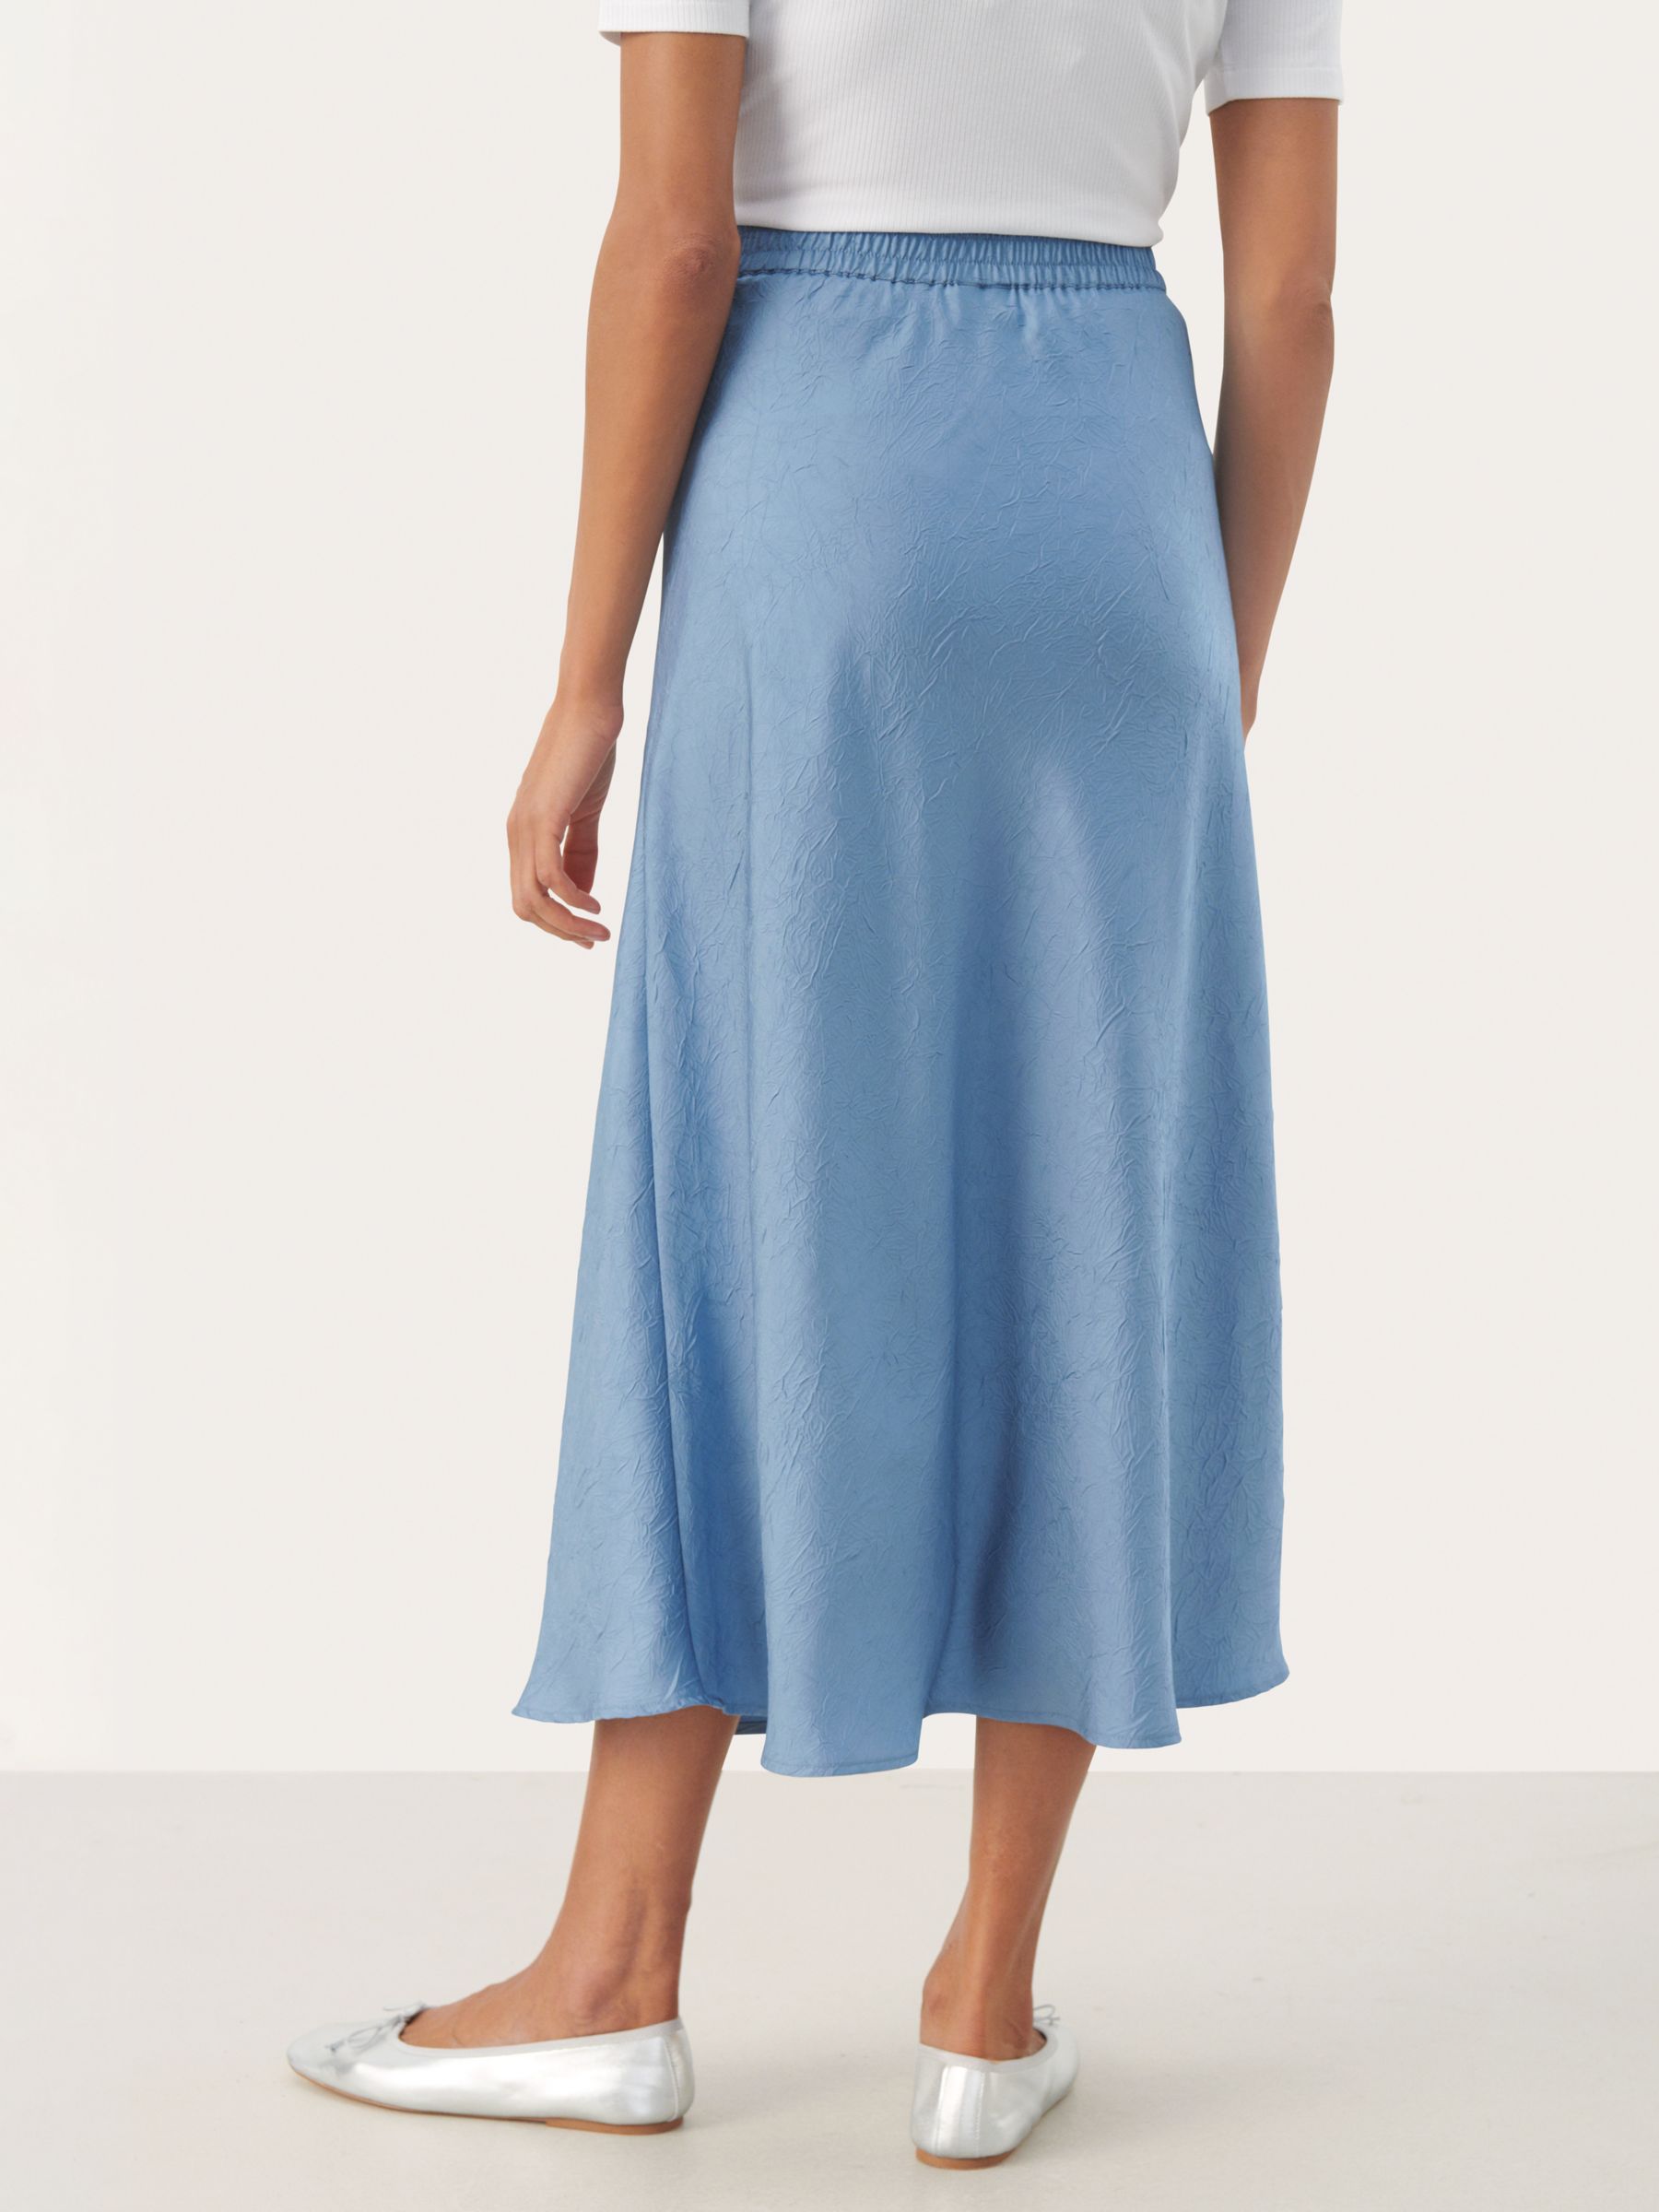 Buy Part Two Dolly High Waist Midi Skirt, Faded Denim Online at johnlewis.com